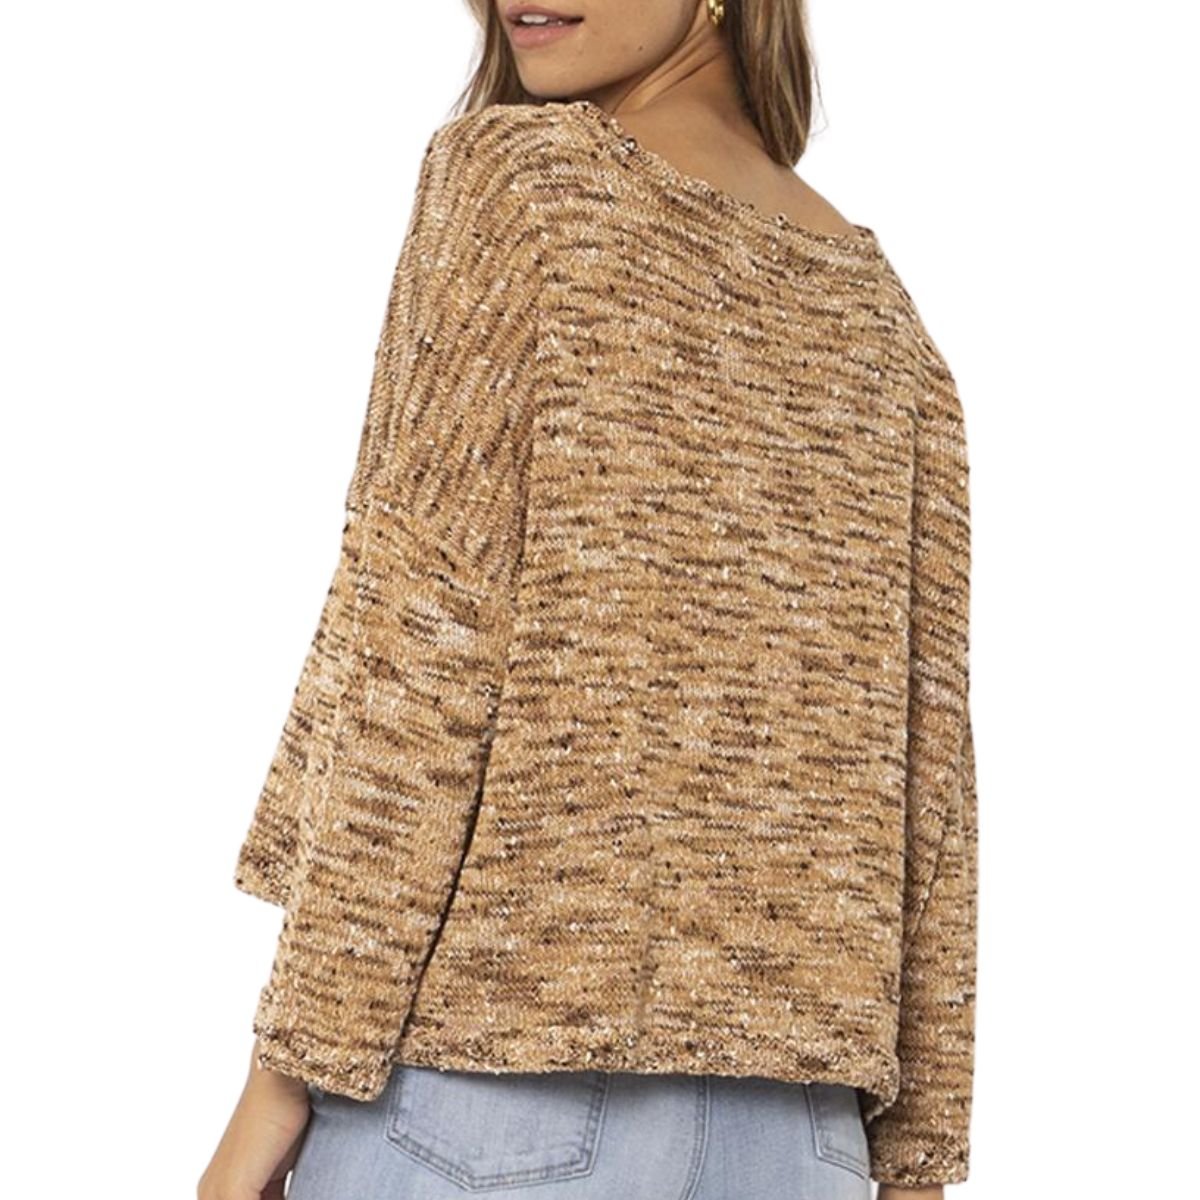 Sisstrevolution Blissed Out L/S Knit Sweater in Sunkissed Sands - BoardCo